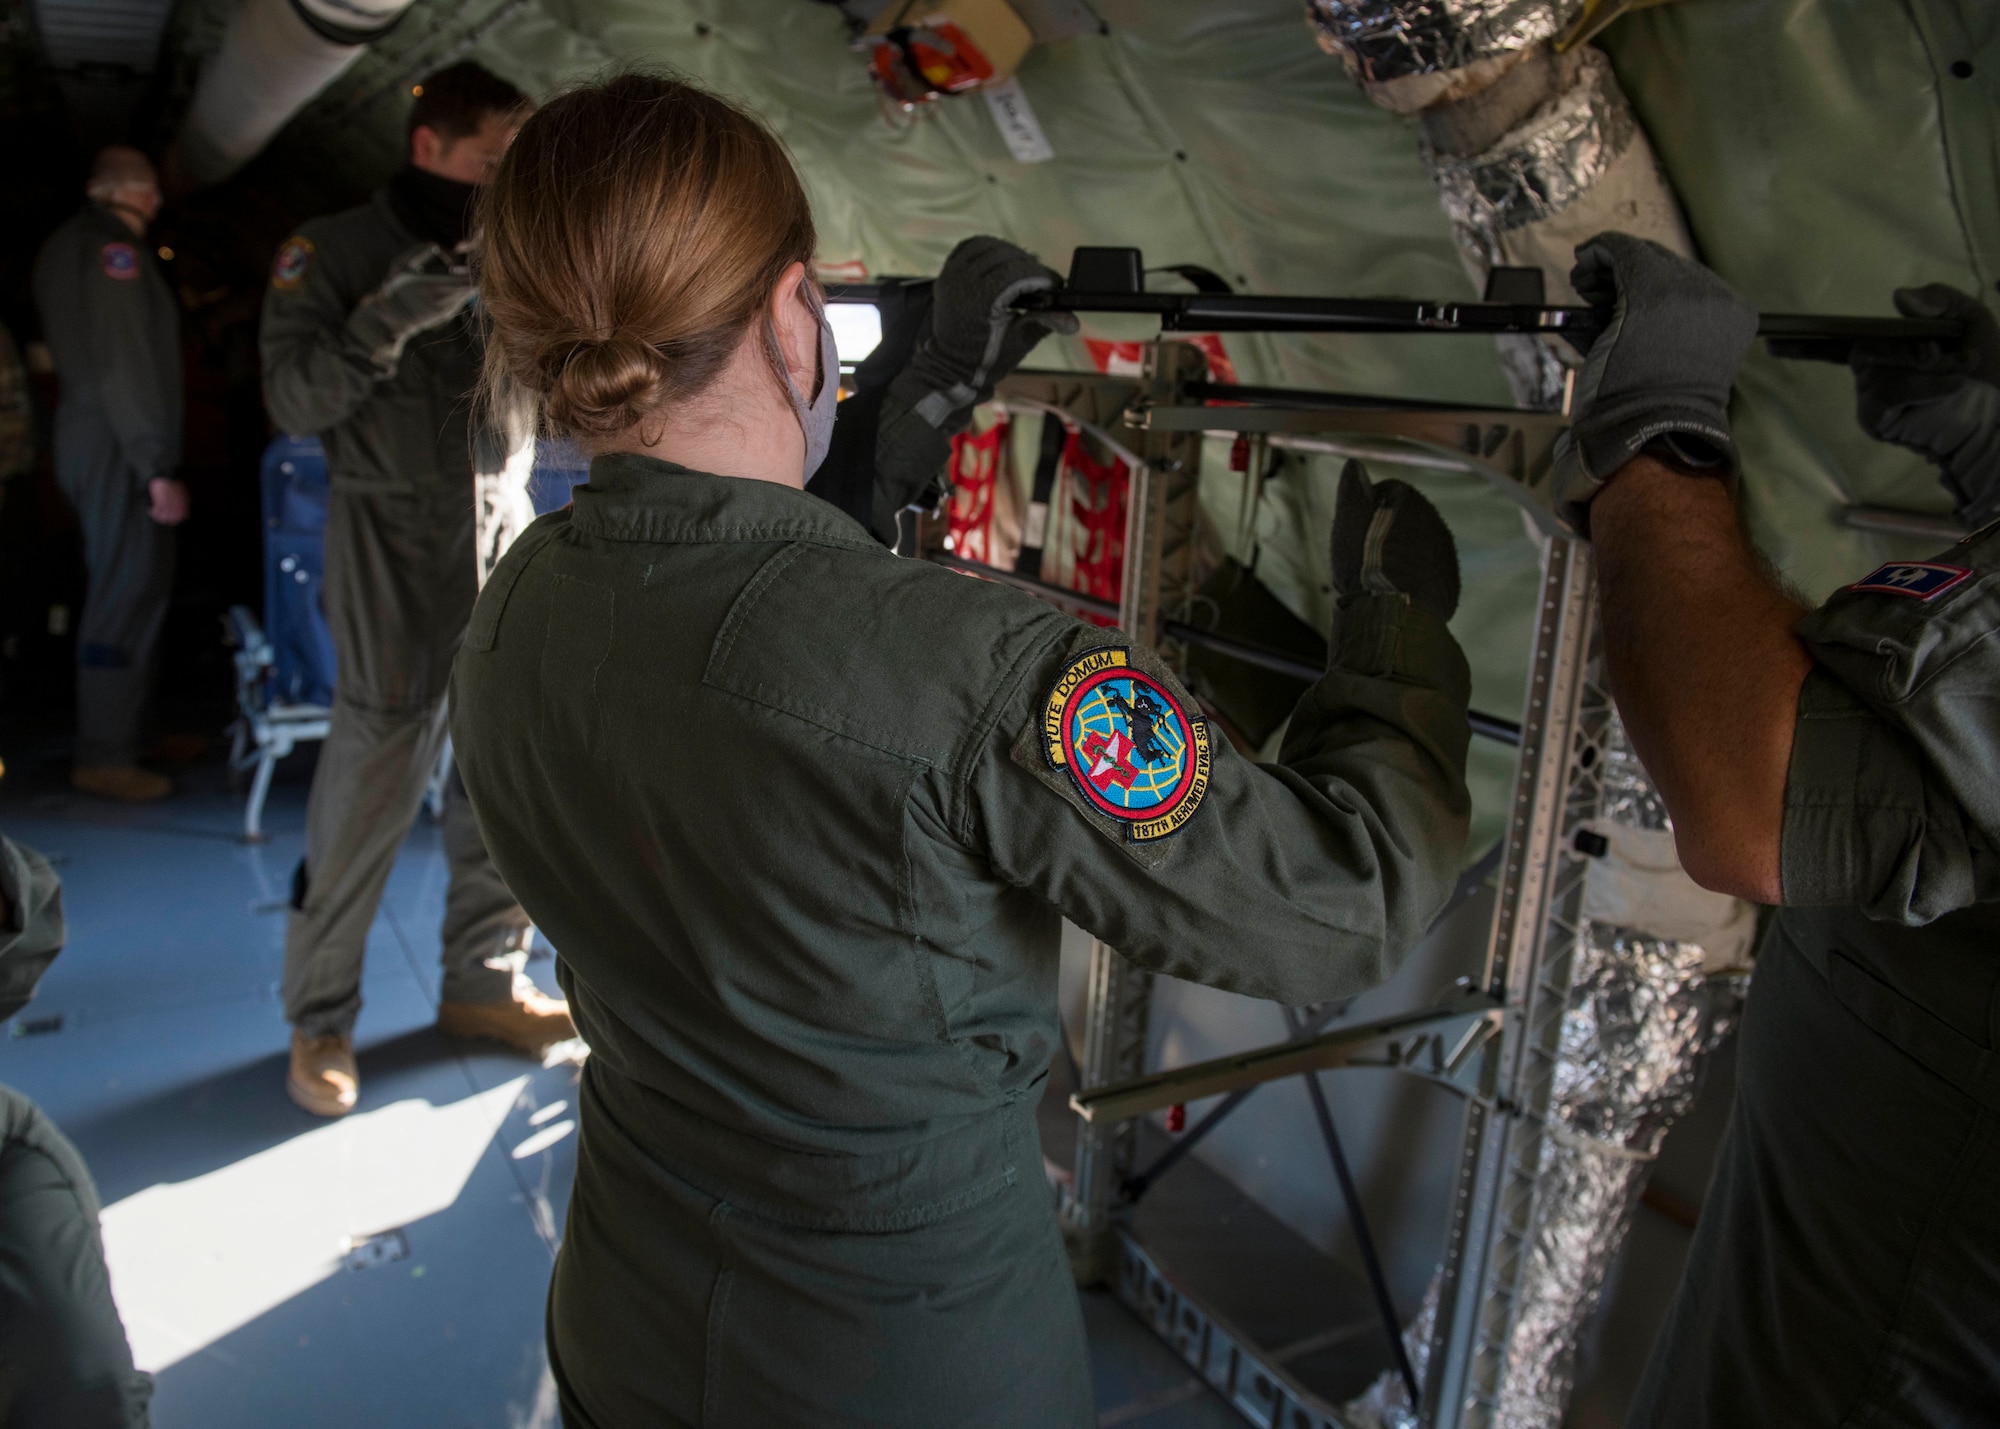 Wyoming Air National Guard Senior Airman Natalie Christofferson, 187th Aeromedical Evacuation Squadron medical technician, configures a stanchion on a KC-135 Stratotanker prior to an aeromedical evacuation mission at Travis Air Force Base, California, Nov. 7, 2020. Even though the primary mission of the KC-135 is extending Global Reach through air refueling, Stratotankers are capable of supporting a variety of missions including cargo delivery, AE, passenger delivery, serving as a communication platform and more. (U.S. Air Force photo by Senior Airman Lawrence Sena)